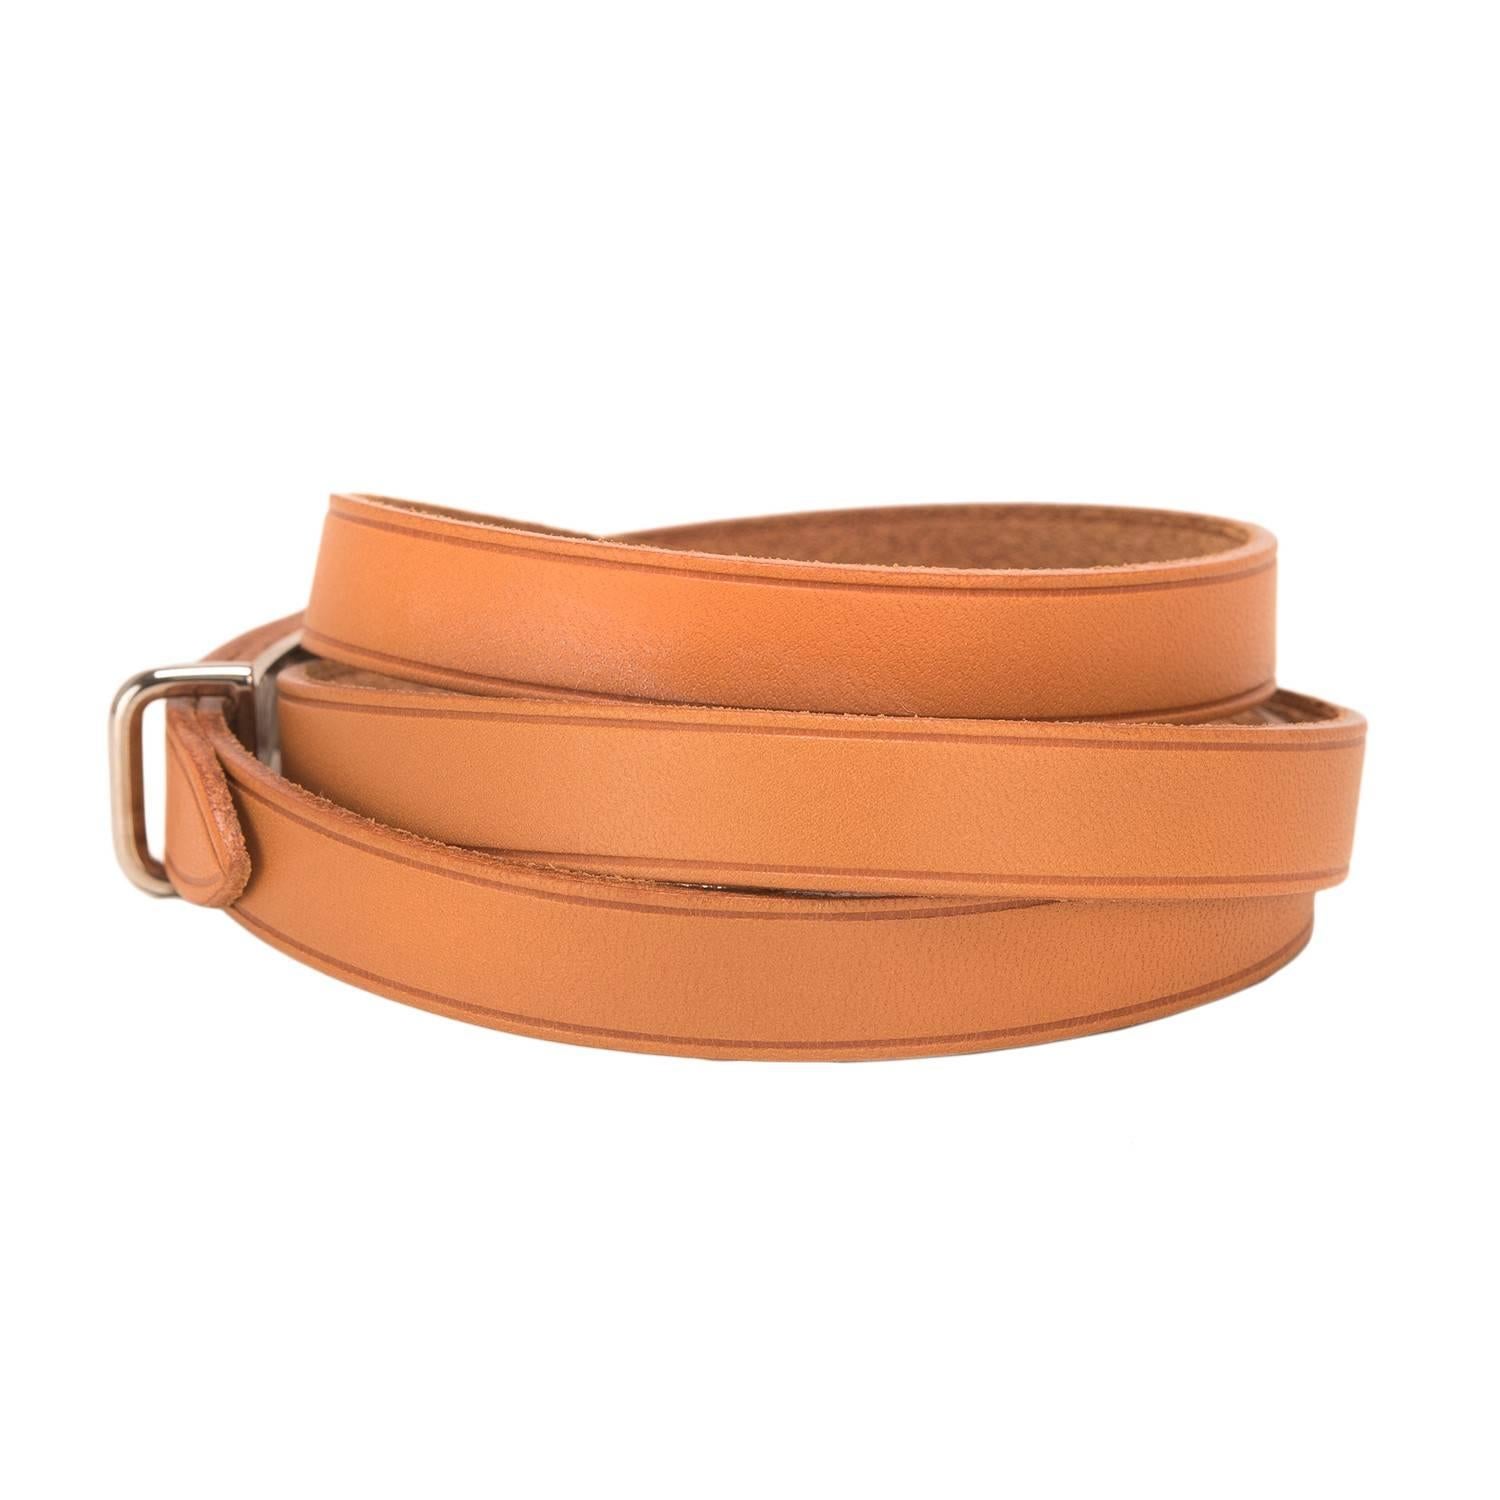 Hermes Brown calfskin leather quadruple wrap bracelet.

It has silver and palladium plated hardware.

Origin: France

Condition: Pristine, never worn

Accompanied by: Hermes box

Measurements: Length (total): 28.25in; Width:  .375in